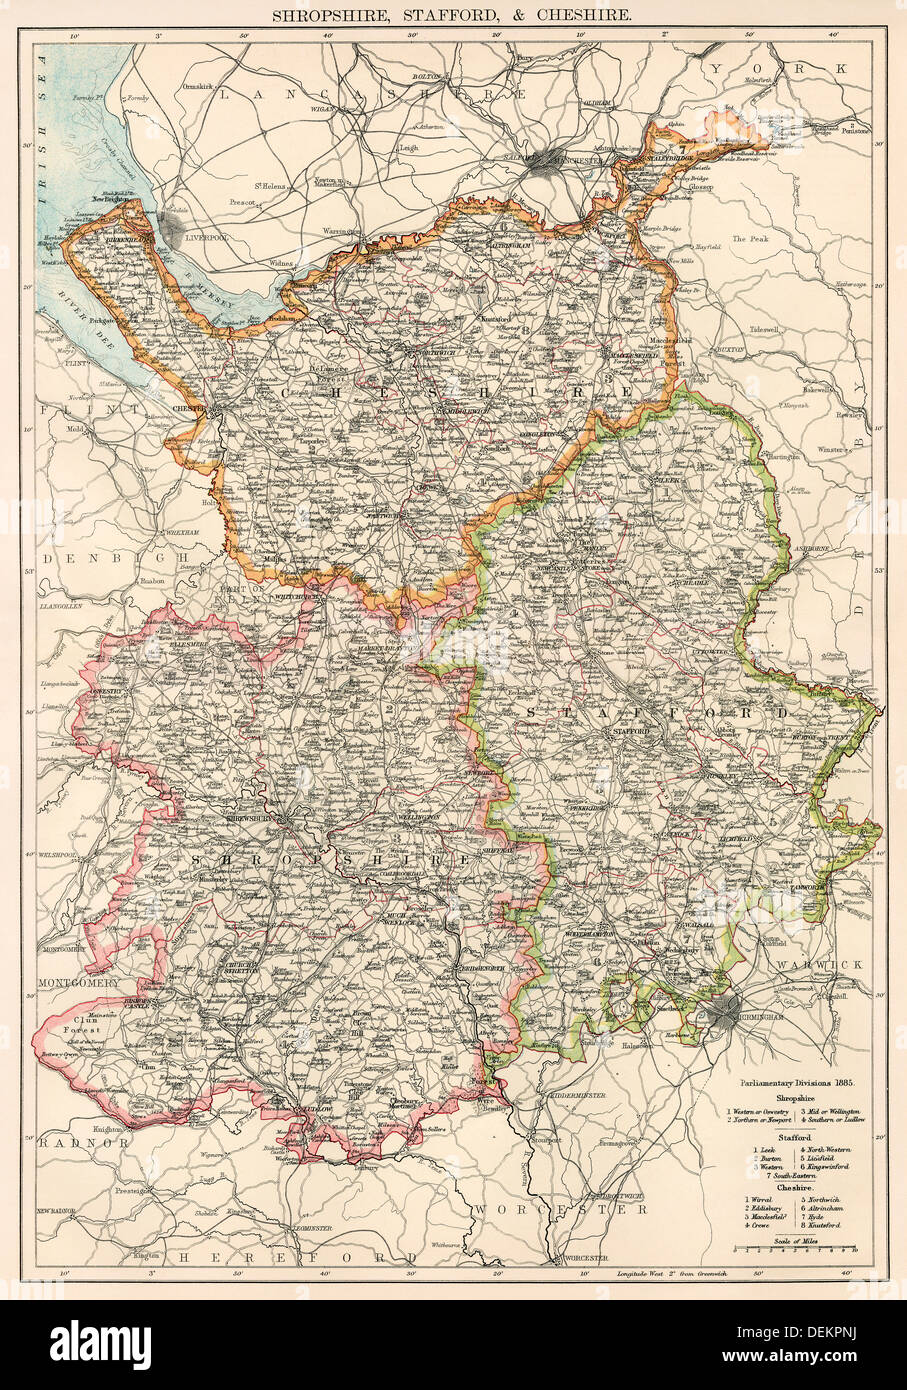 Map of Shropshire, Staffordshire, and Cheshire, England, 1870s. Color lithograph Stock Photo